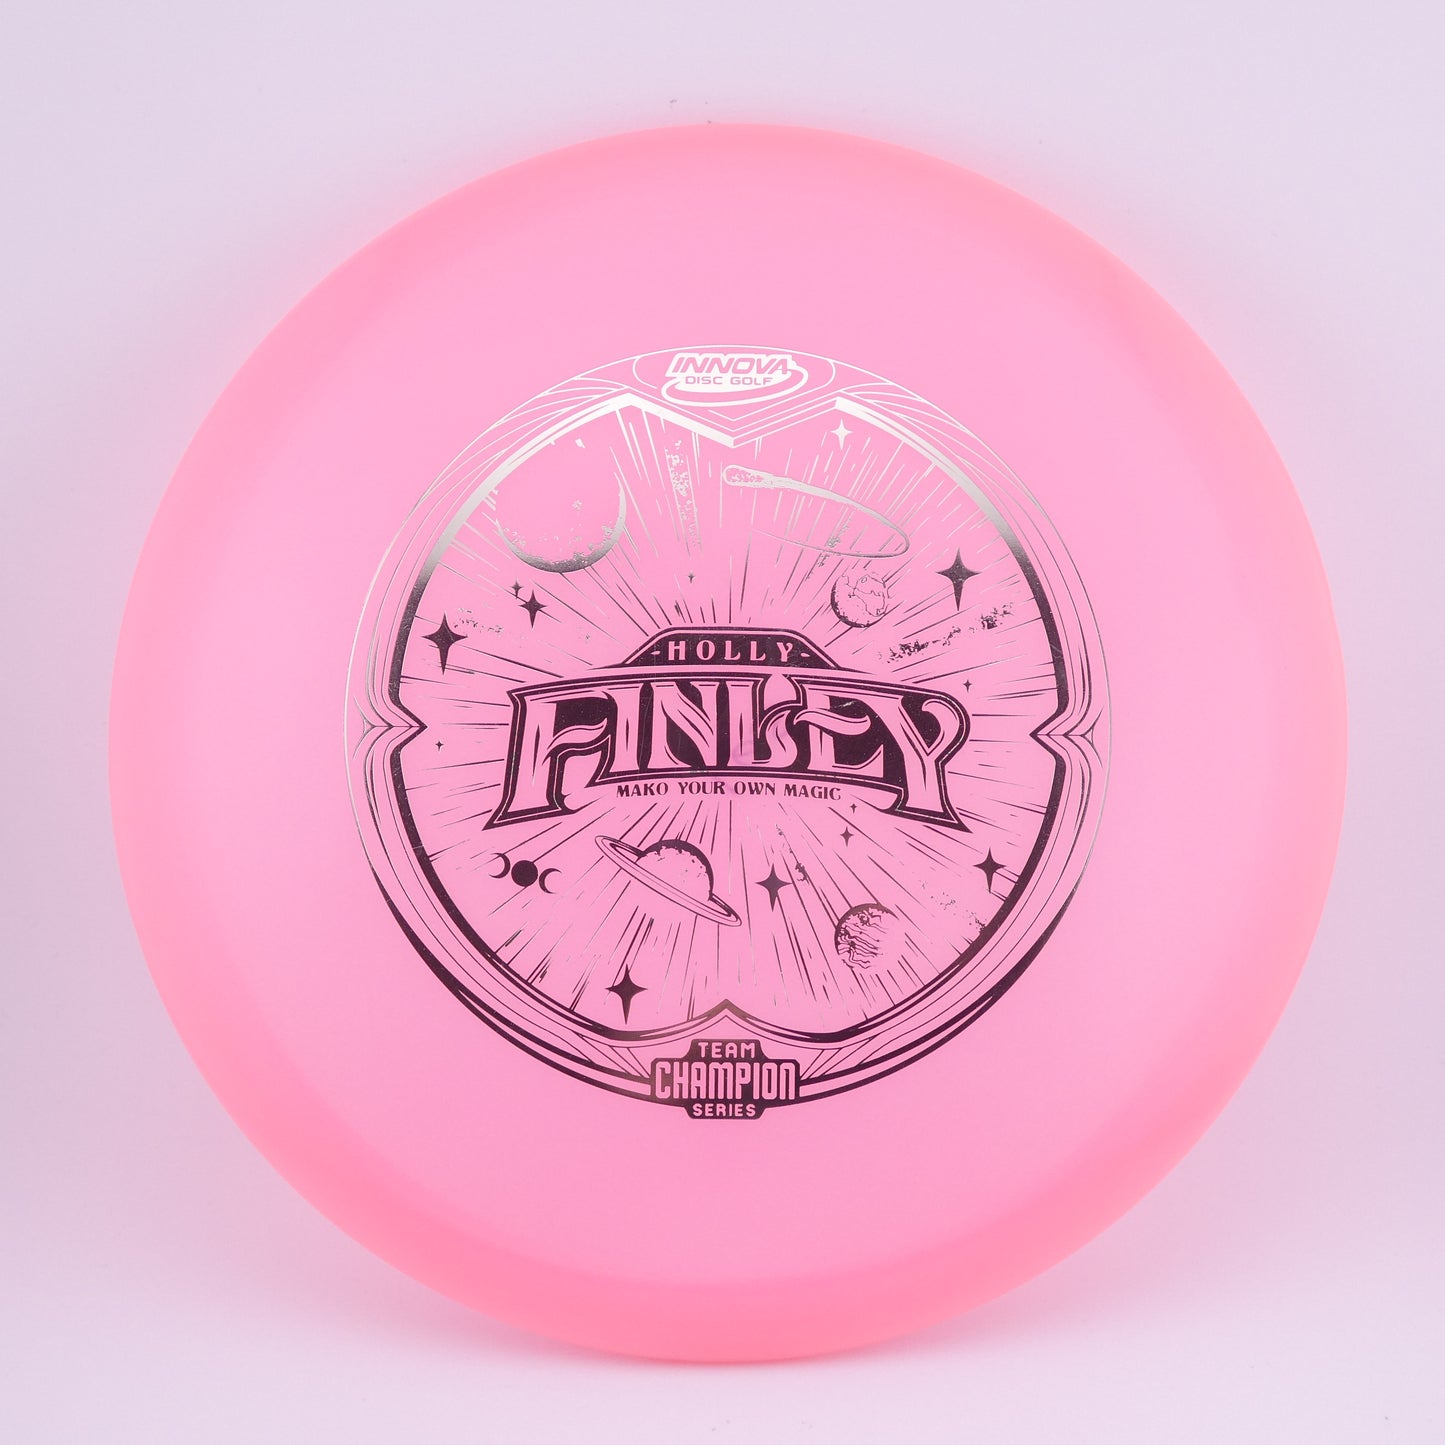 Champion Color Glow Mako 3 Holly Finley (Tour Series) Pink